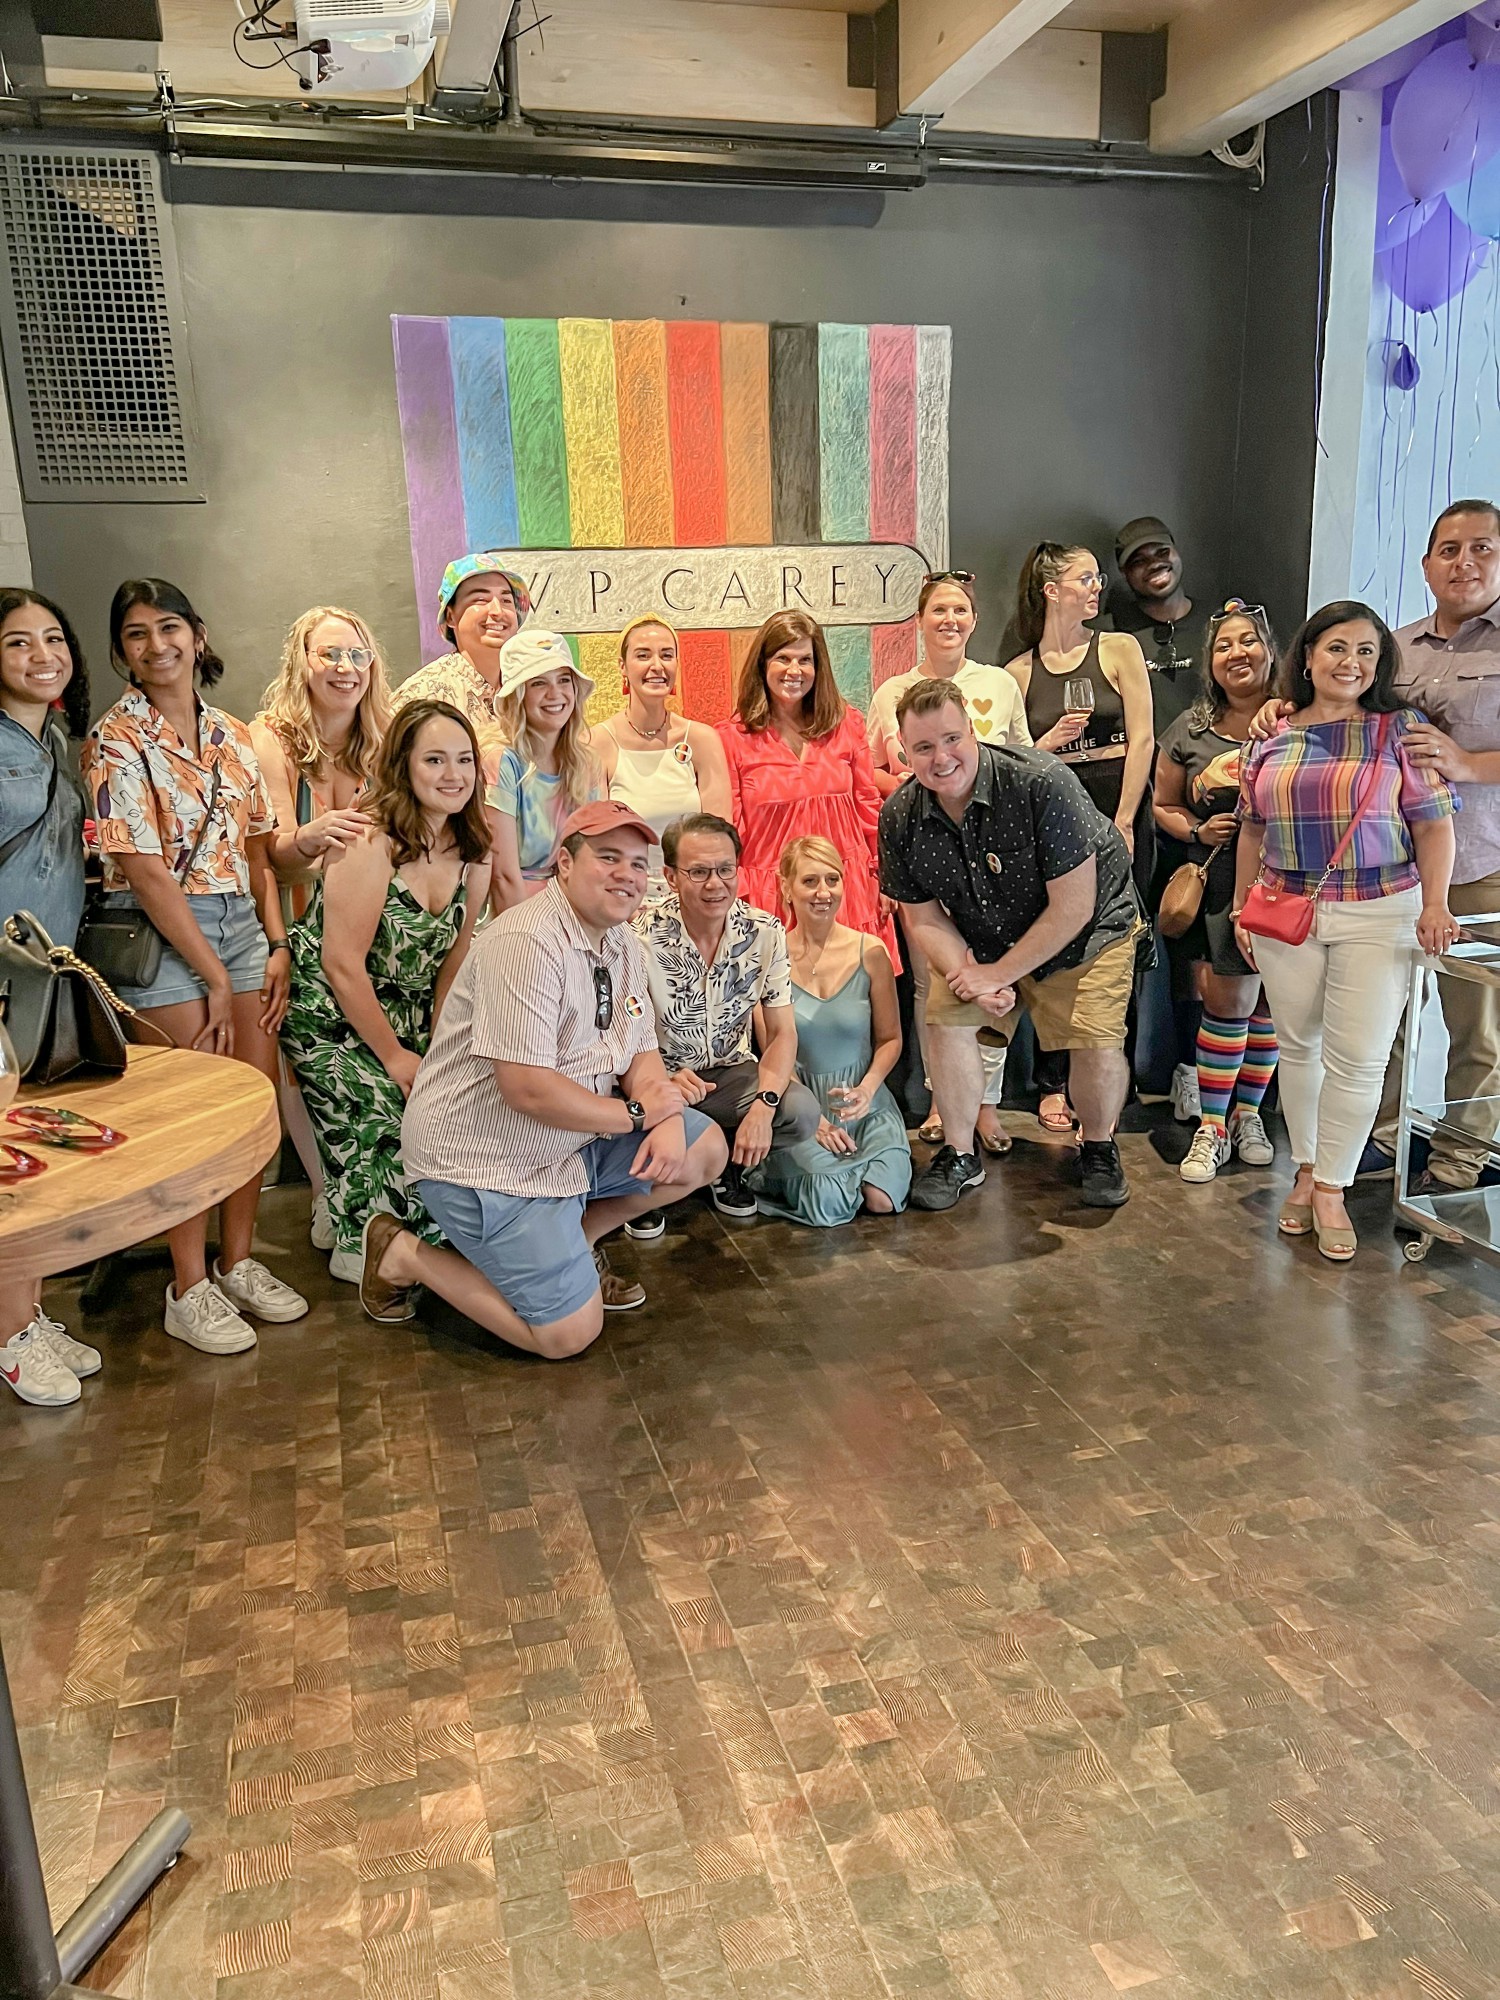 WPC employees and friends celebrated Allyship and the LGBTQ+ community at NYCPride.